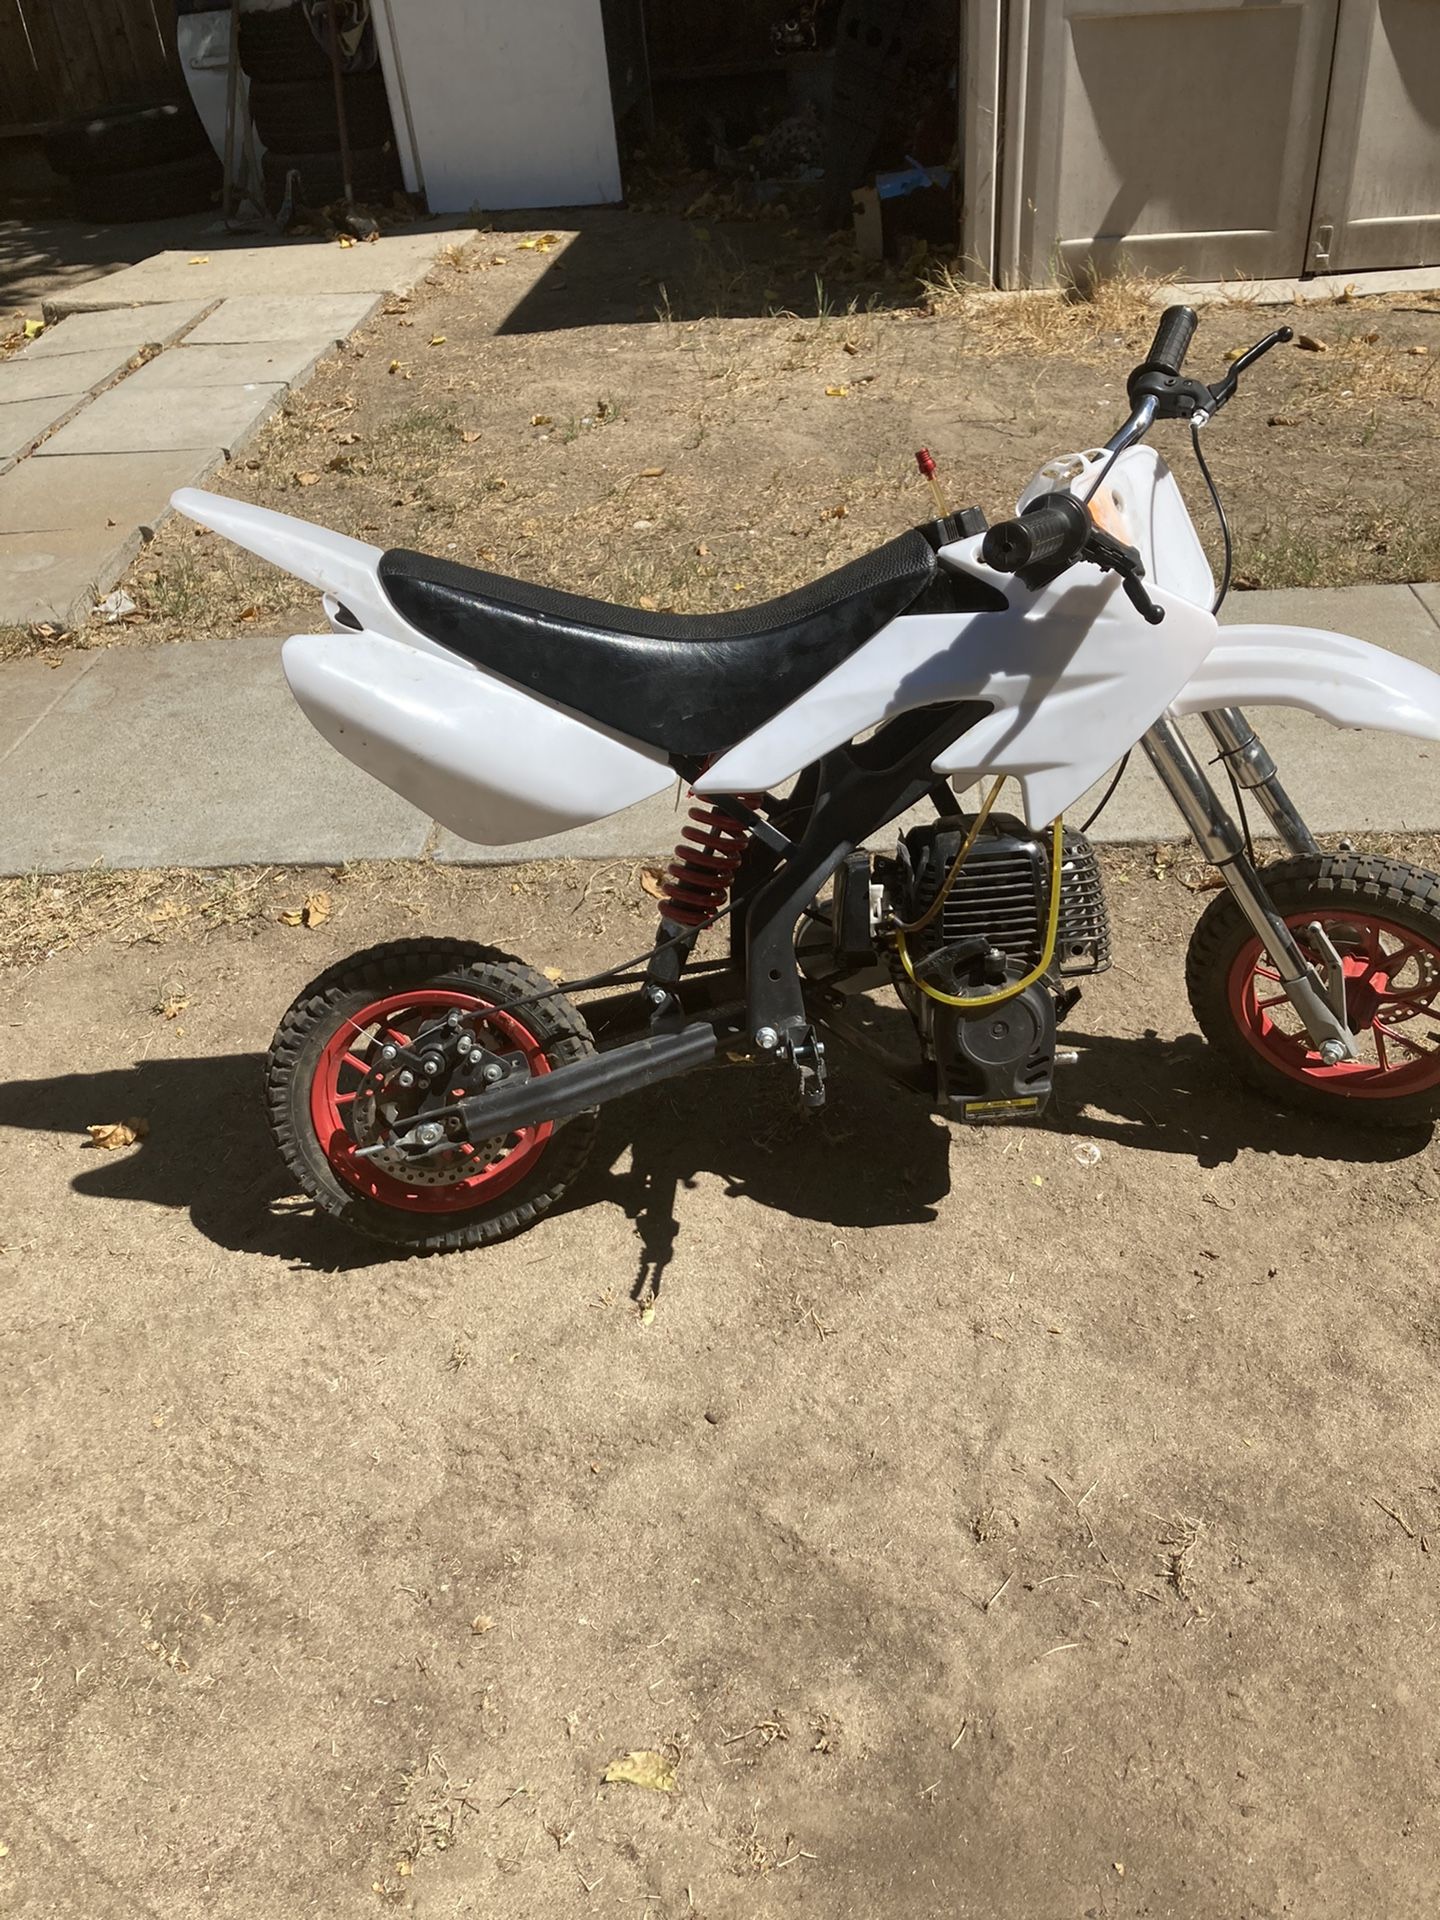 Mini Bike Has A New transmission But It Don’t Go Back It’s A 40cc Motor Everything Is Good Go’s Up To 25mph Brand New Tires Getting A Bigger Bike